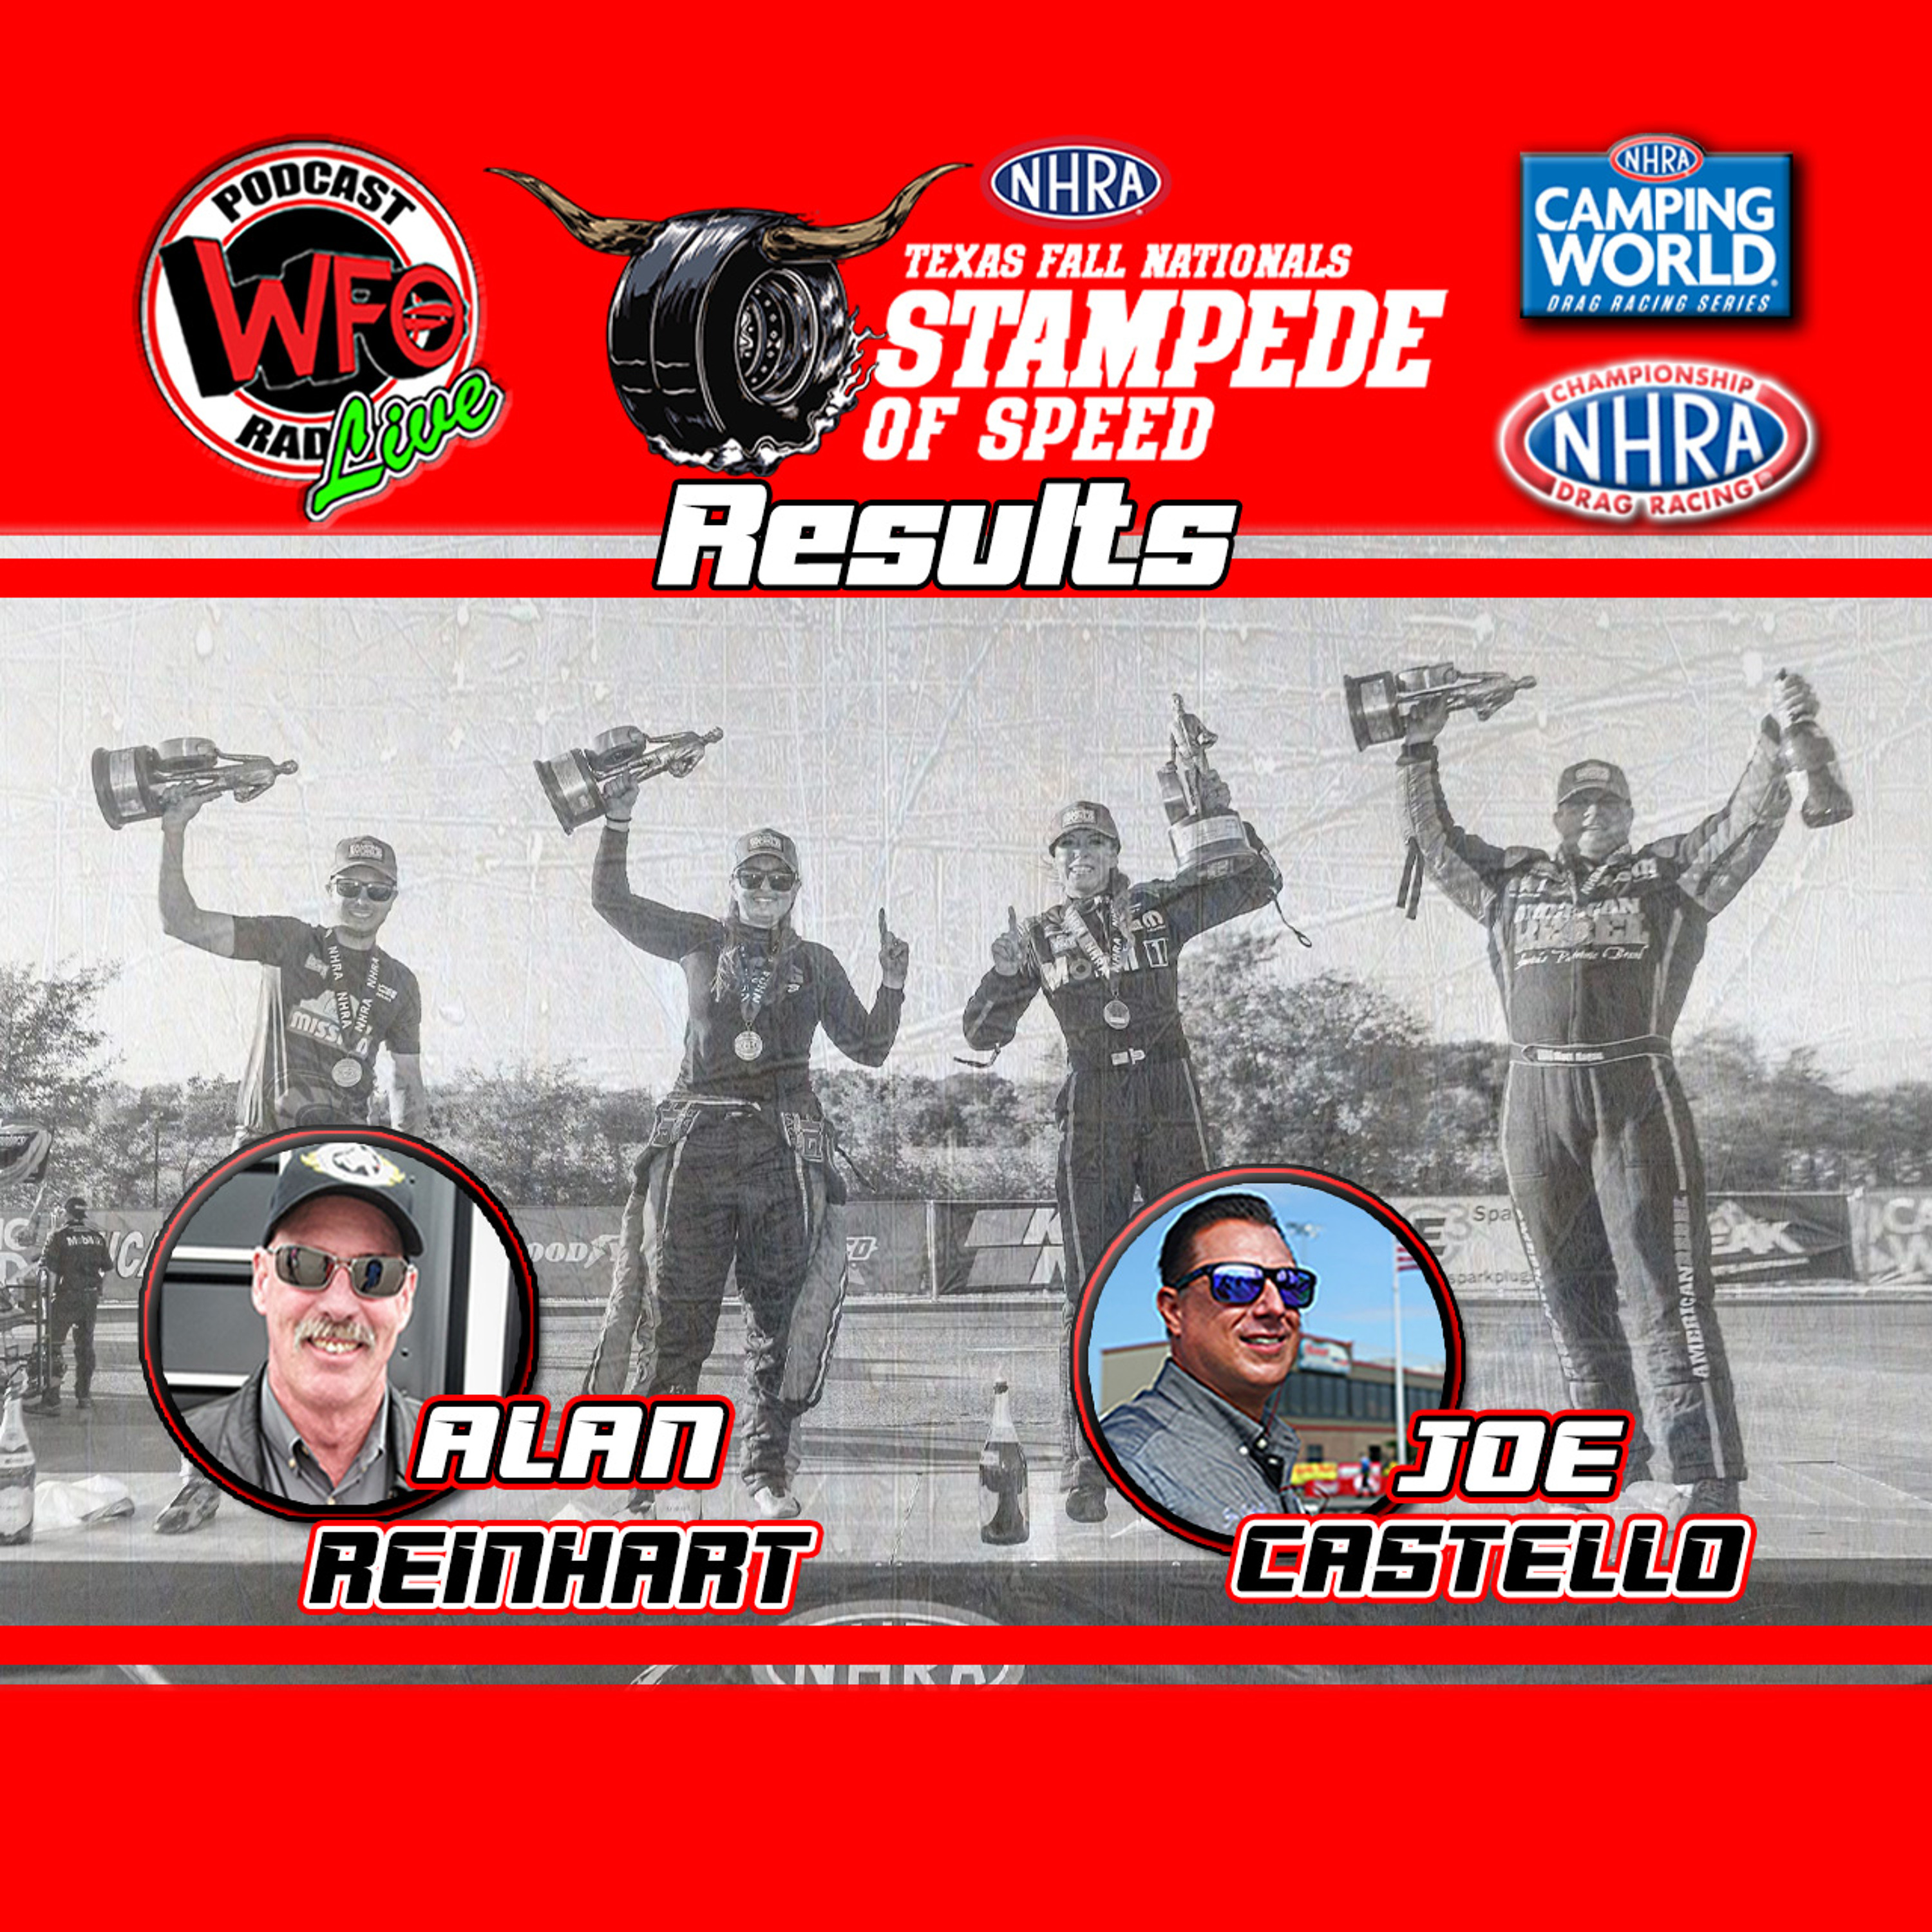 NHRA Results - NHRA Fall Nationals, Stampede of Speed with Alan Reinhart and Joe Castello